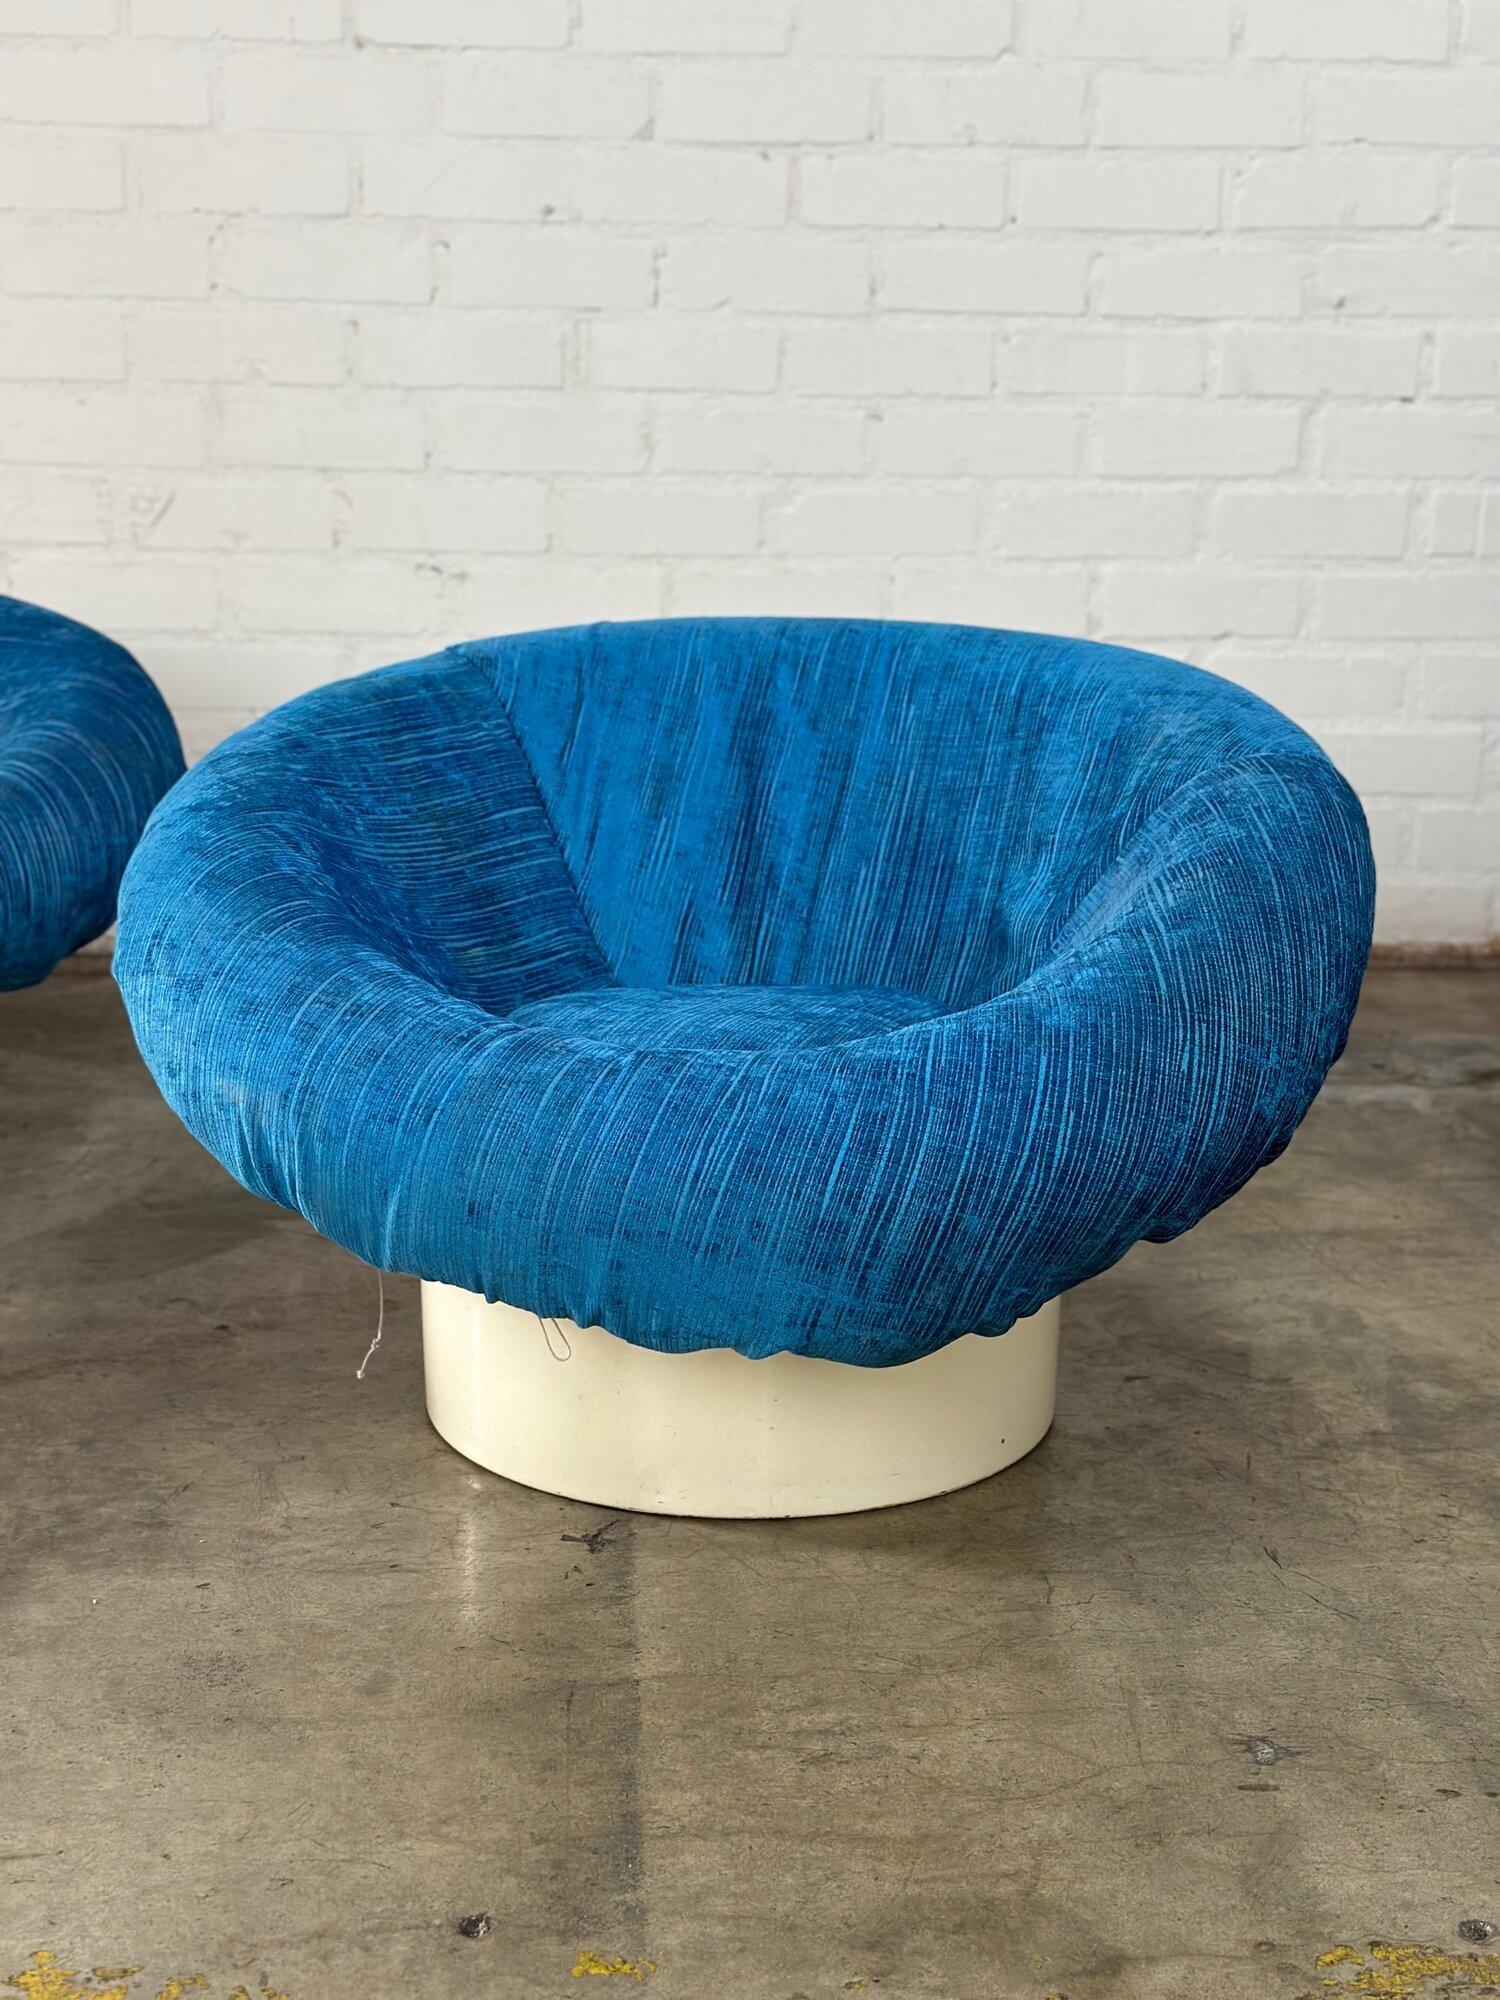 W35 D37 H21.5 SW18 SD22 SW17 SH13

Pair of Krokus style lounge chairs in as is vintage condition.Upholstered in an electric blue velvet. Fiber glass base does show areas of wear that can be seen in photos.

*Price is for the pair.

circa 1960’s